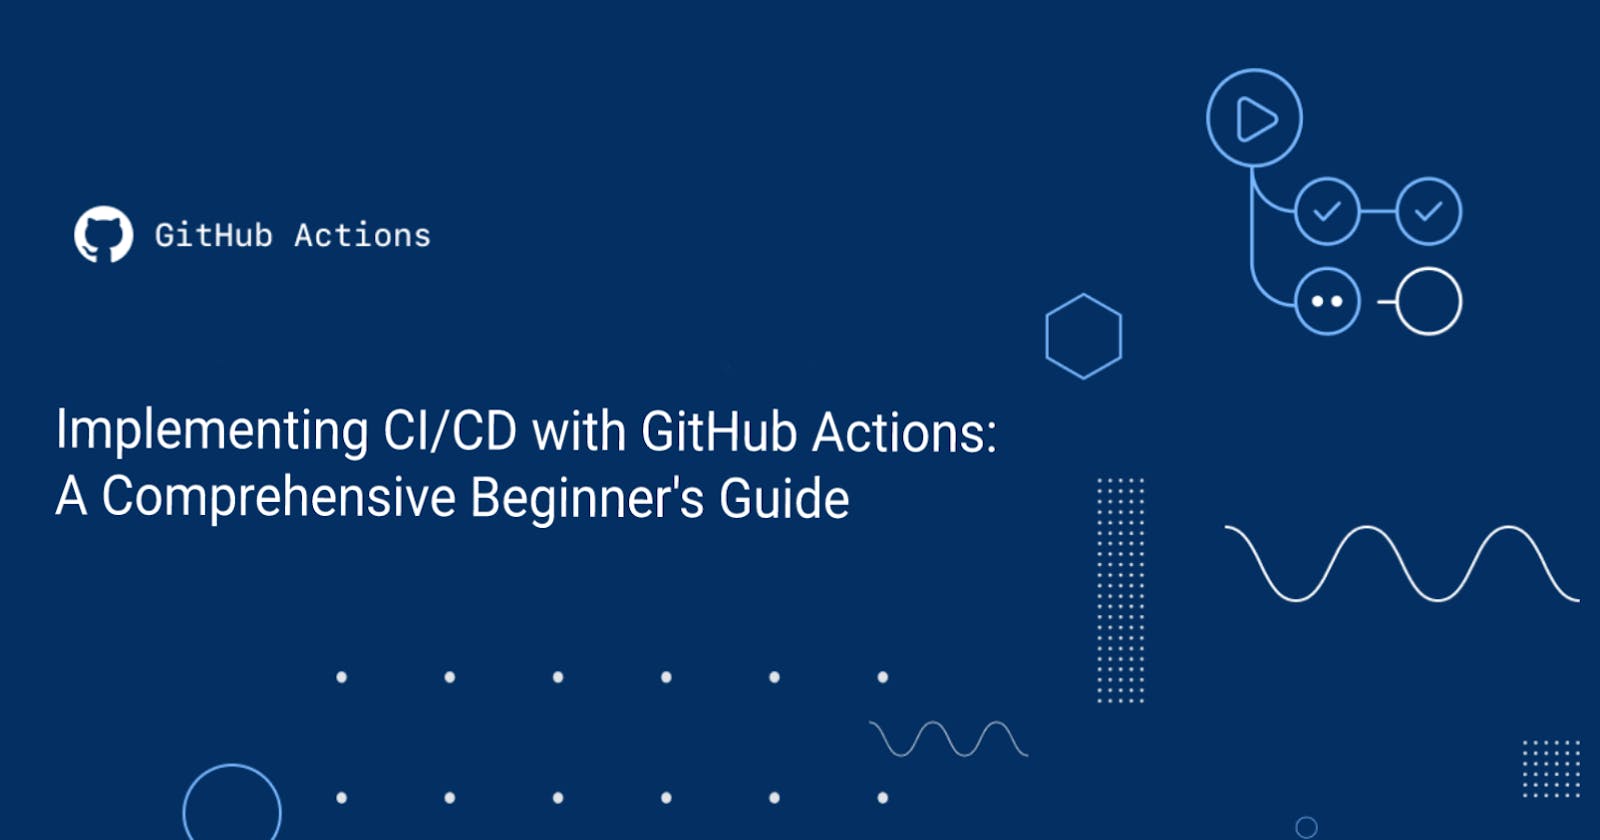 Implementing CI/CD with GitHub Actions: A Comprehensive Beginner's Guide: Part 1